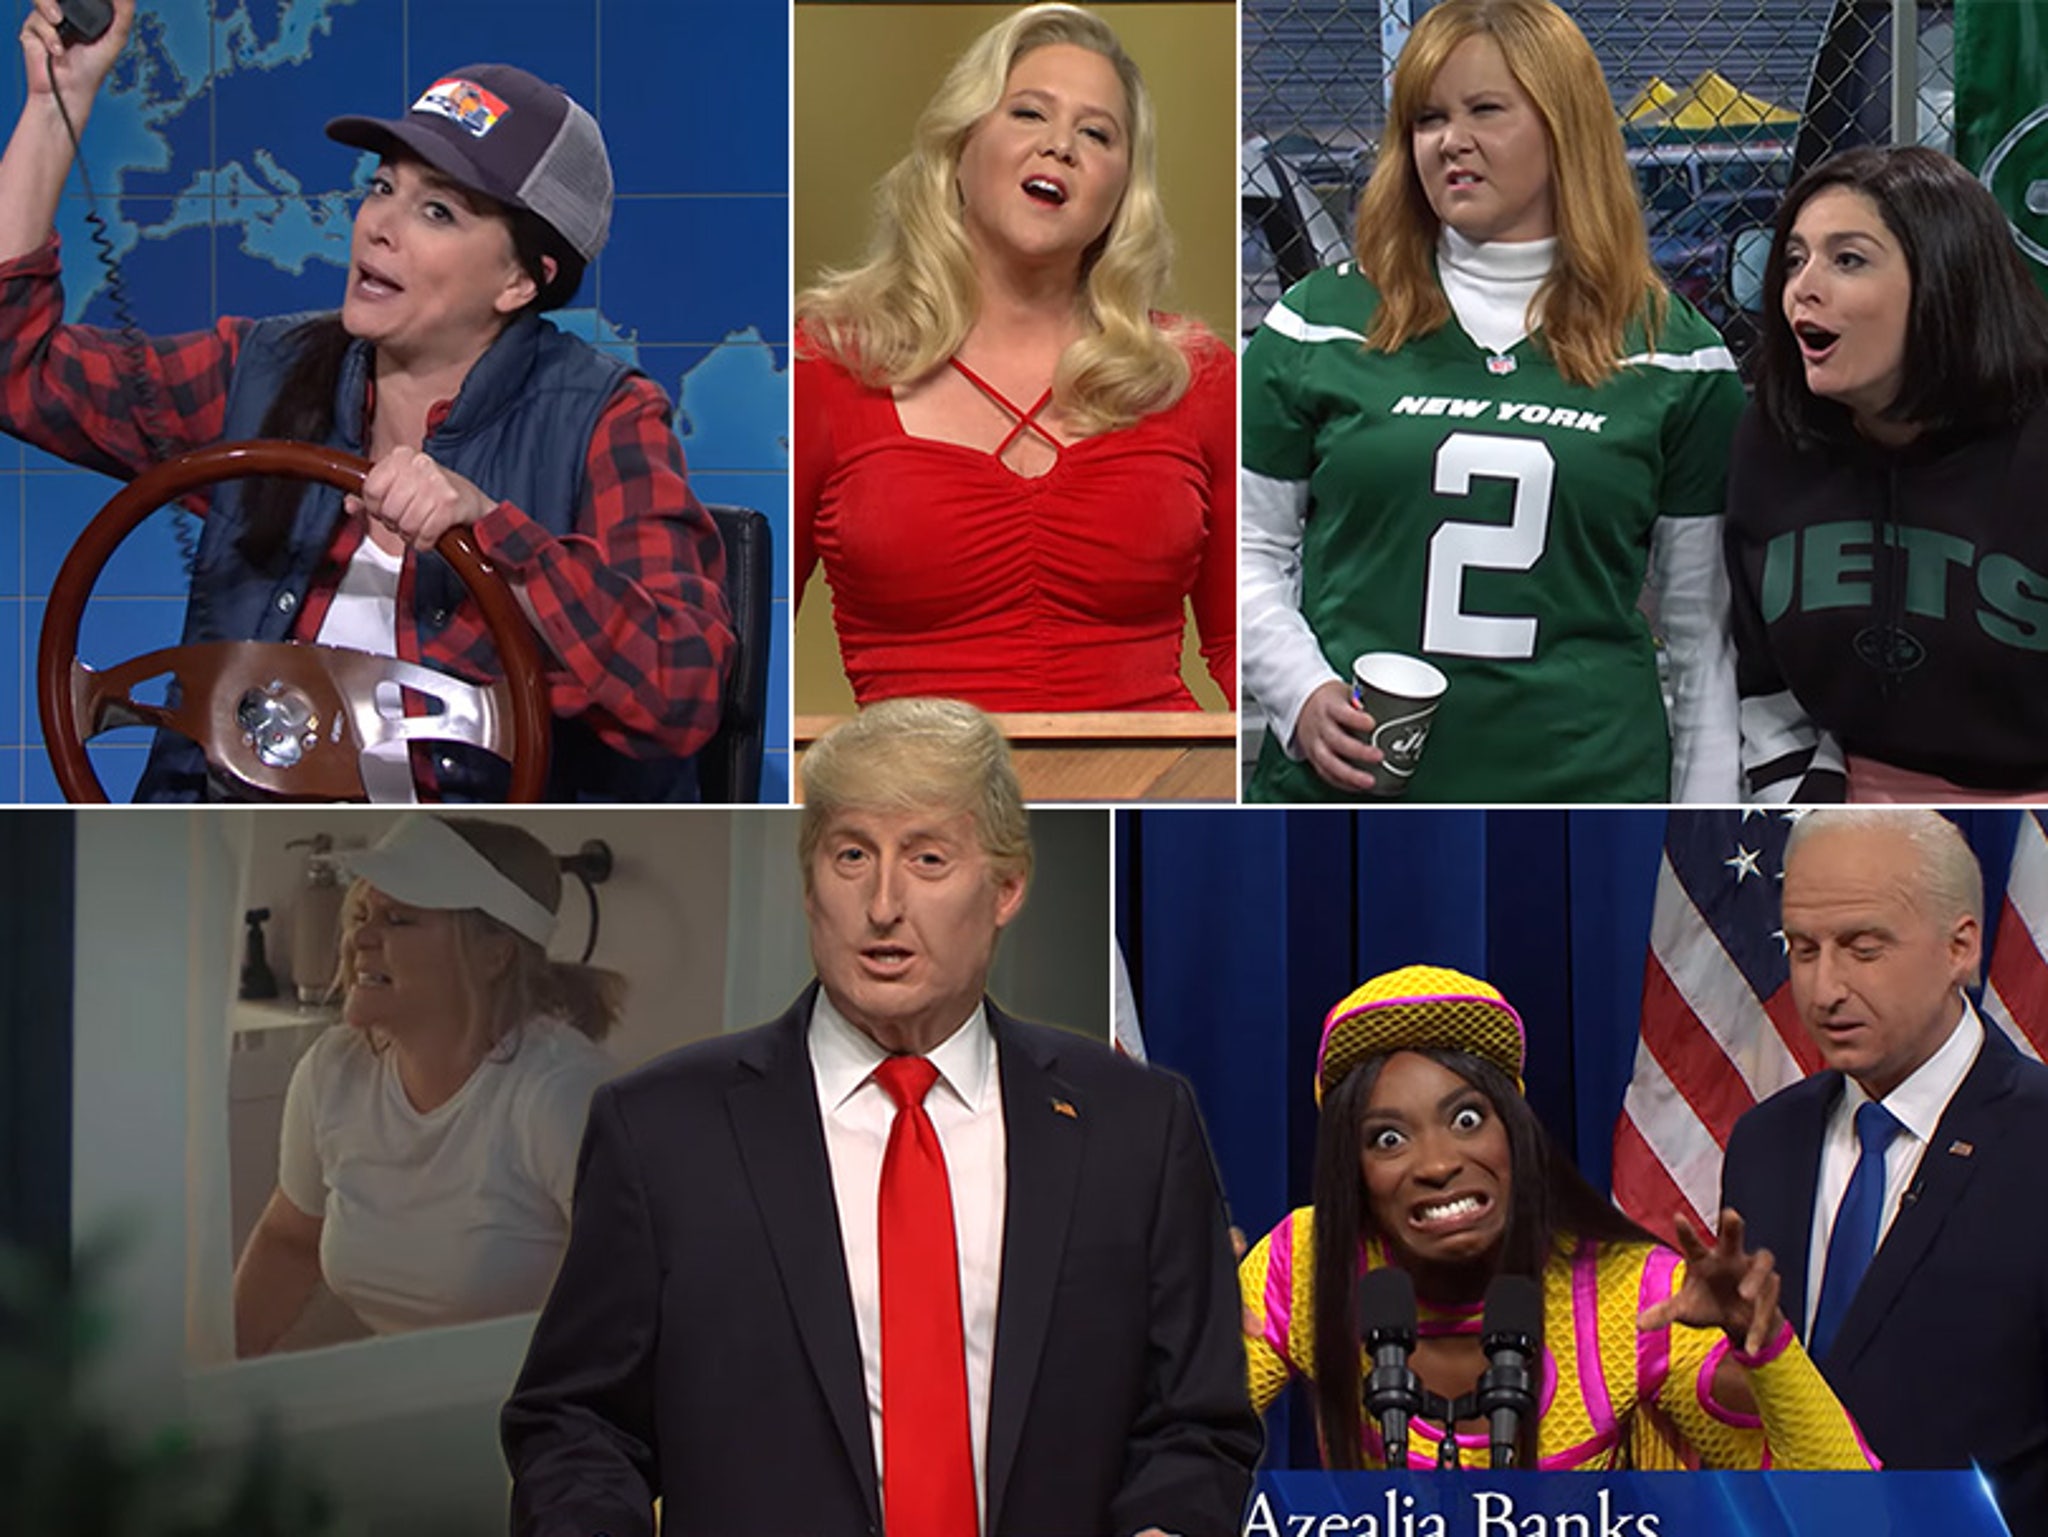 Amy Schumer Spoofs New York Jets Fans in SNL Sketch